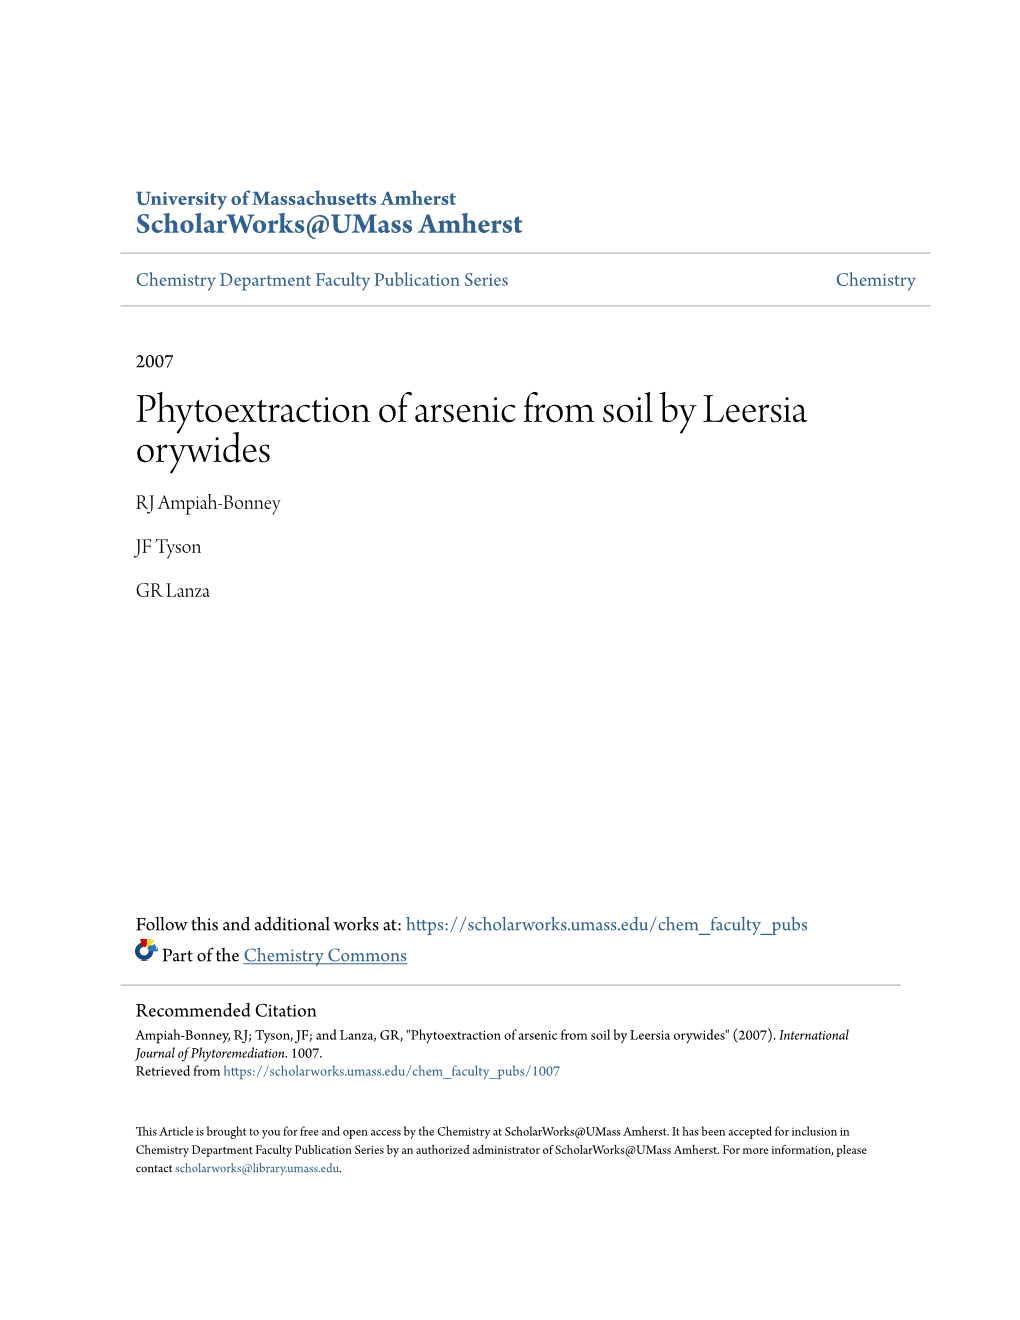 Phytoextraction of Arsenic from Soil by Leersia Orywides RJ Ampiah-Bonney